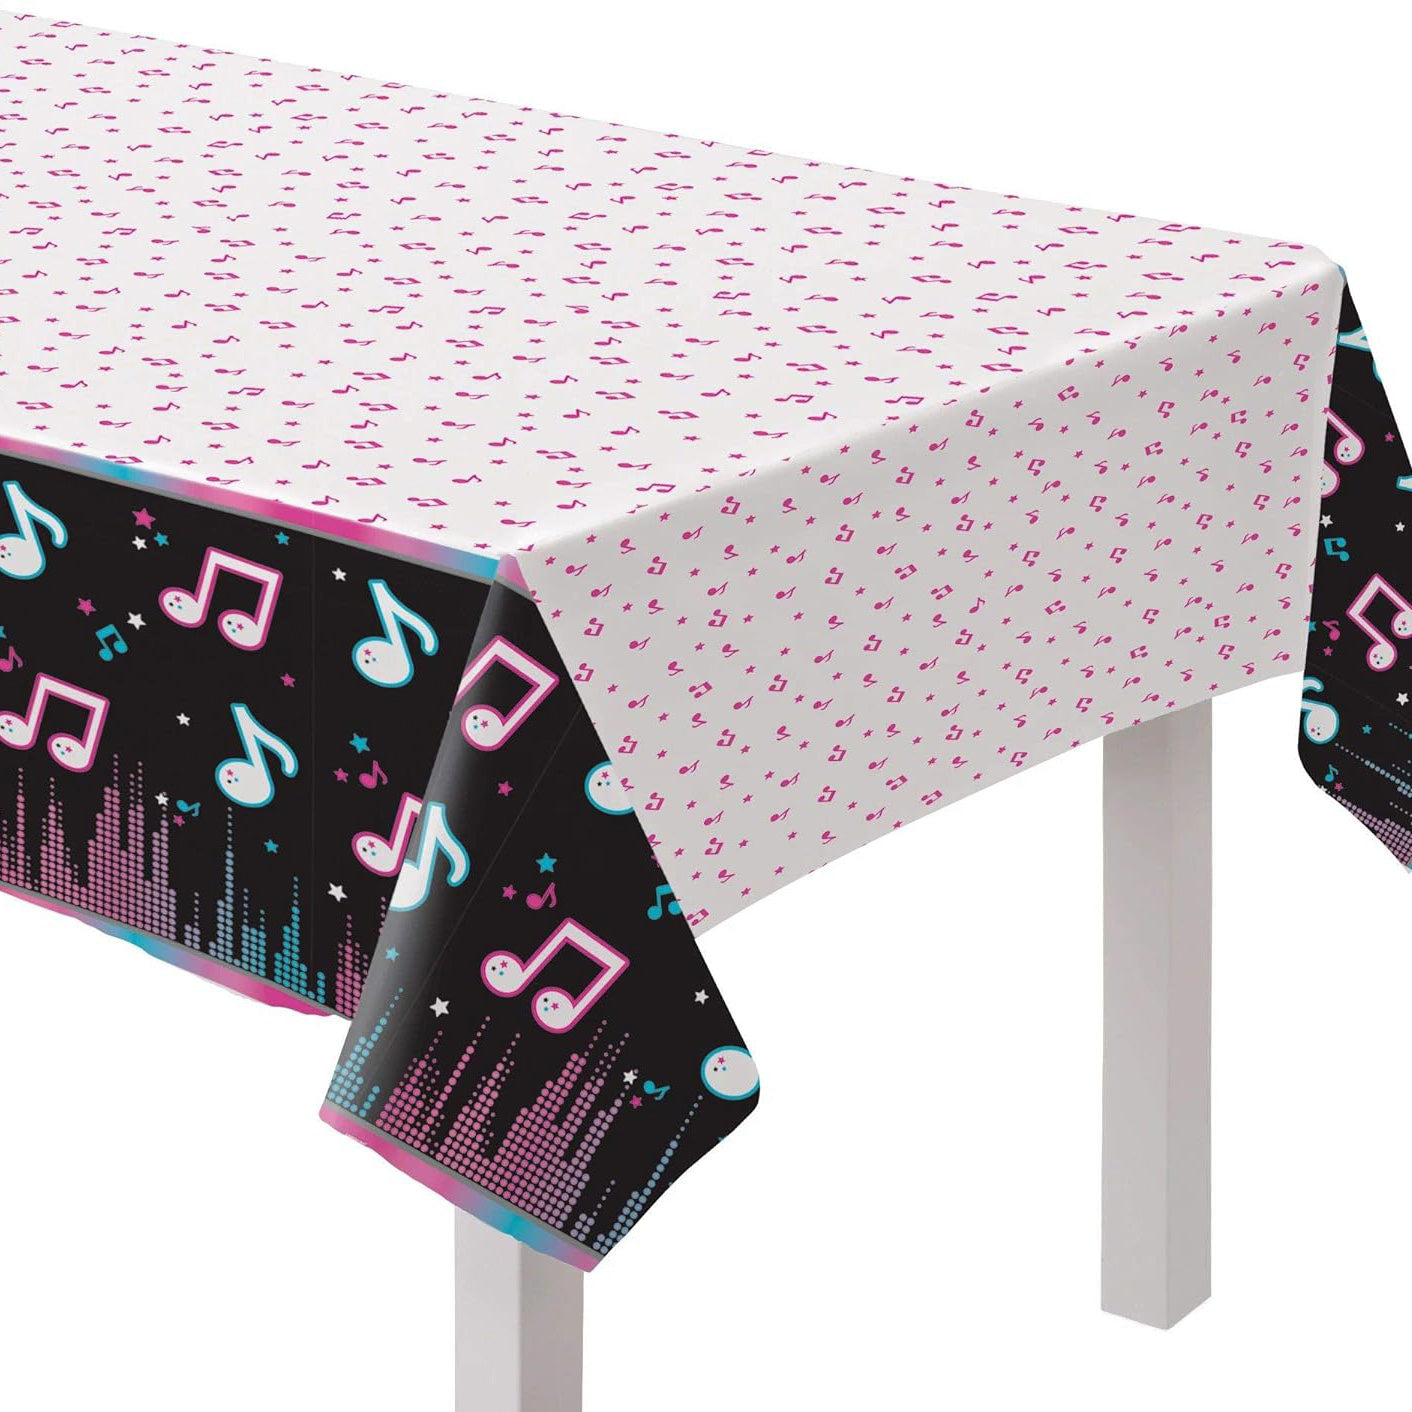 Internet Famous Paper Rectangular Table Cover 54in x 96in